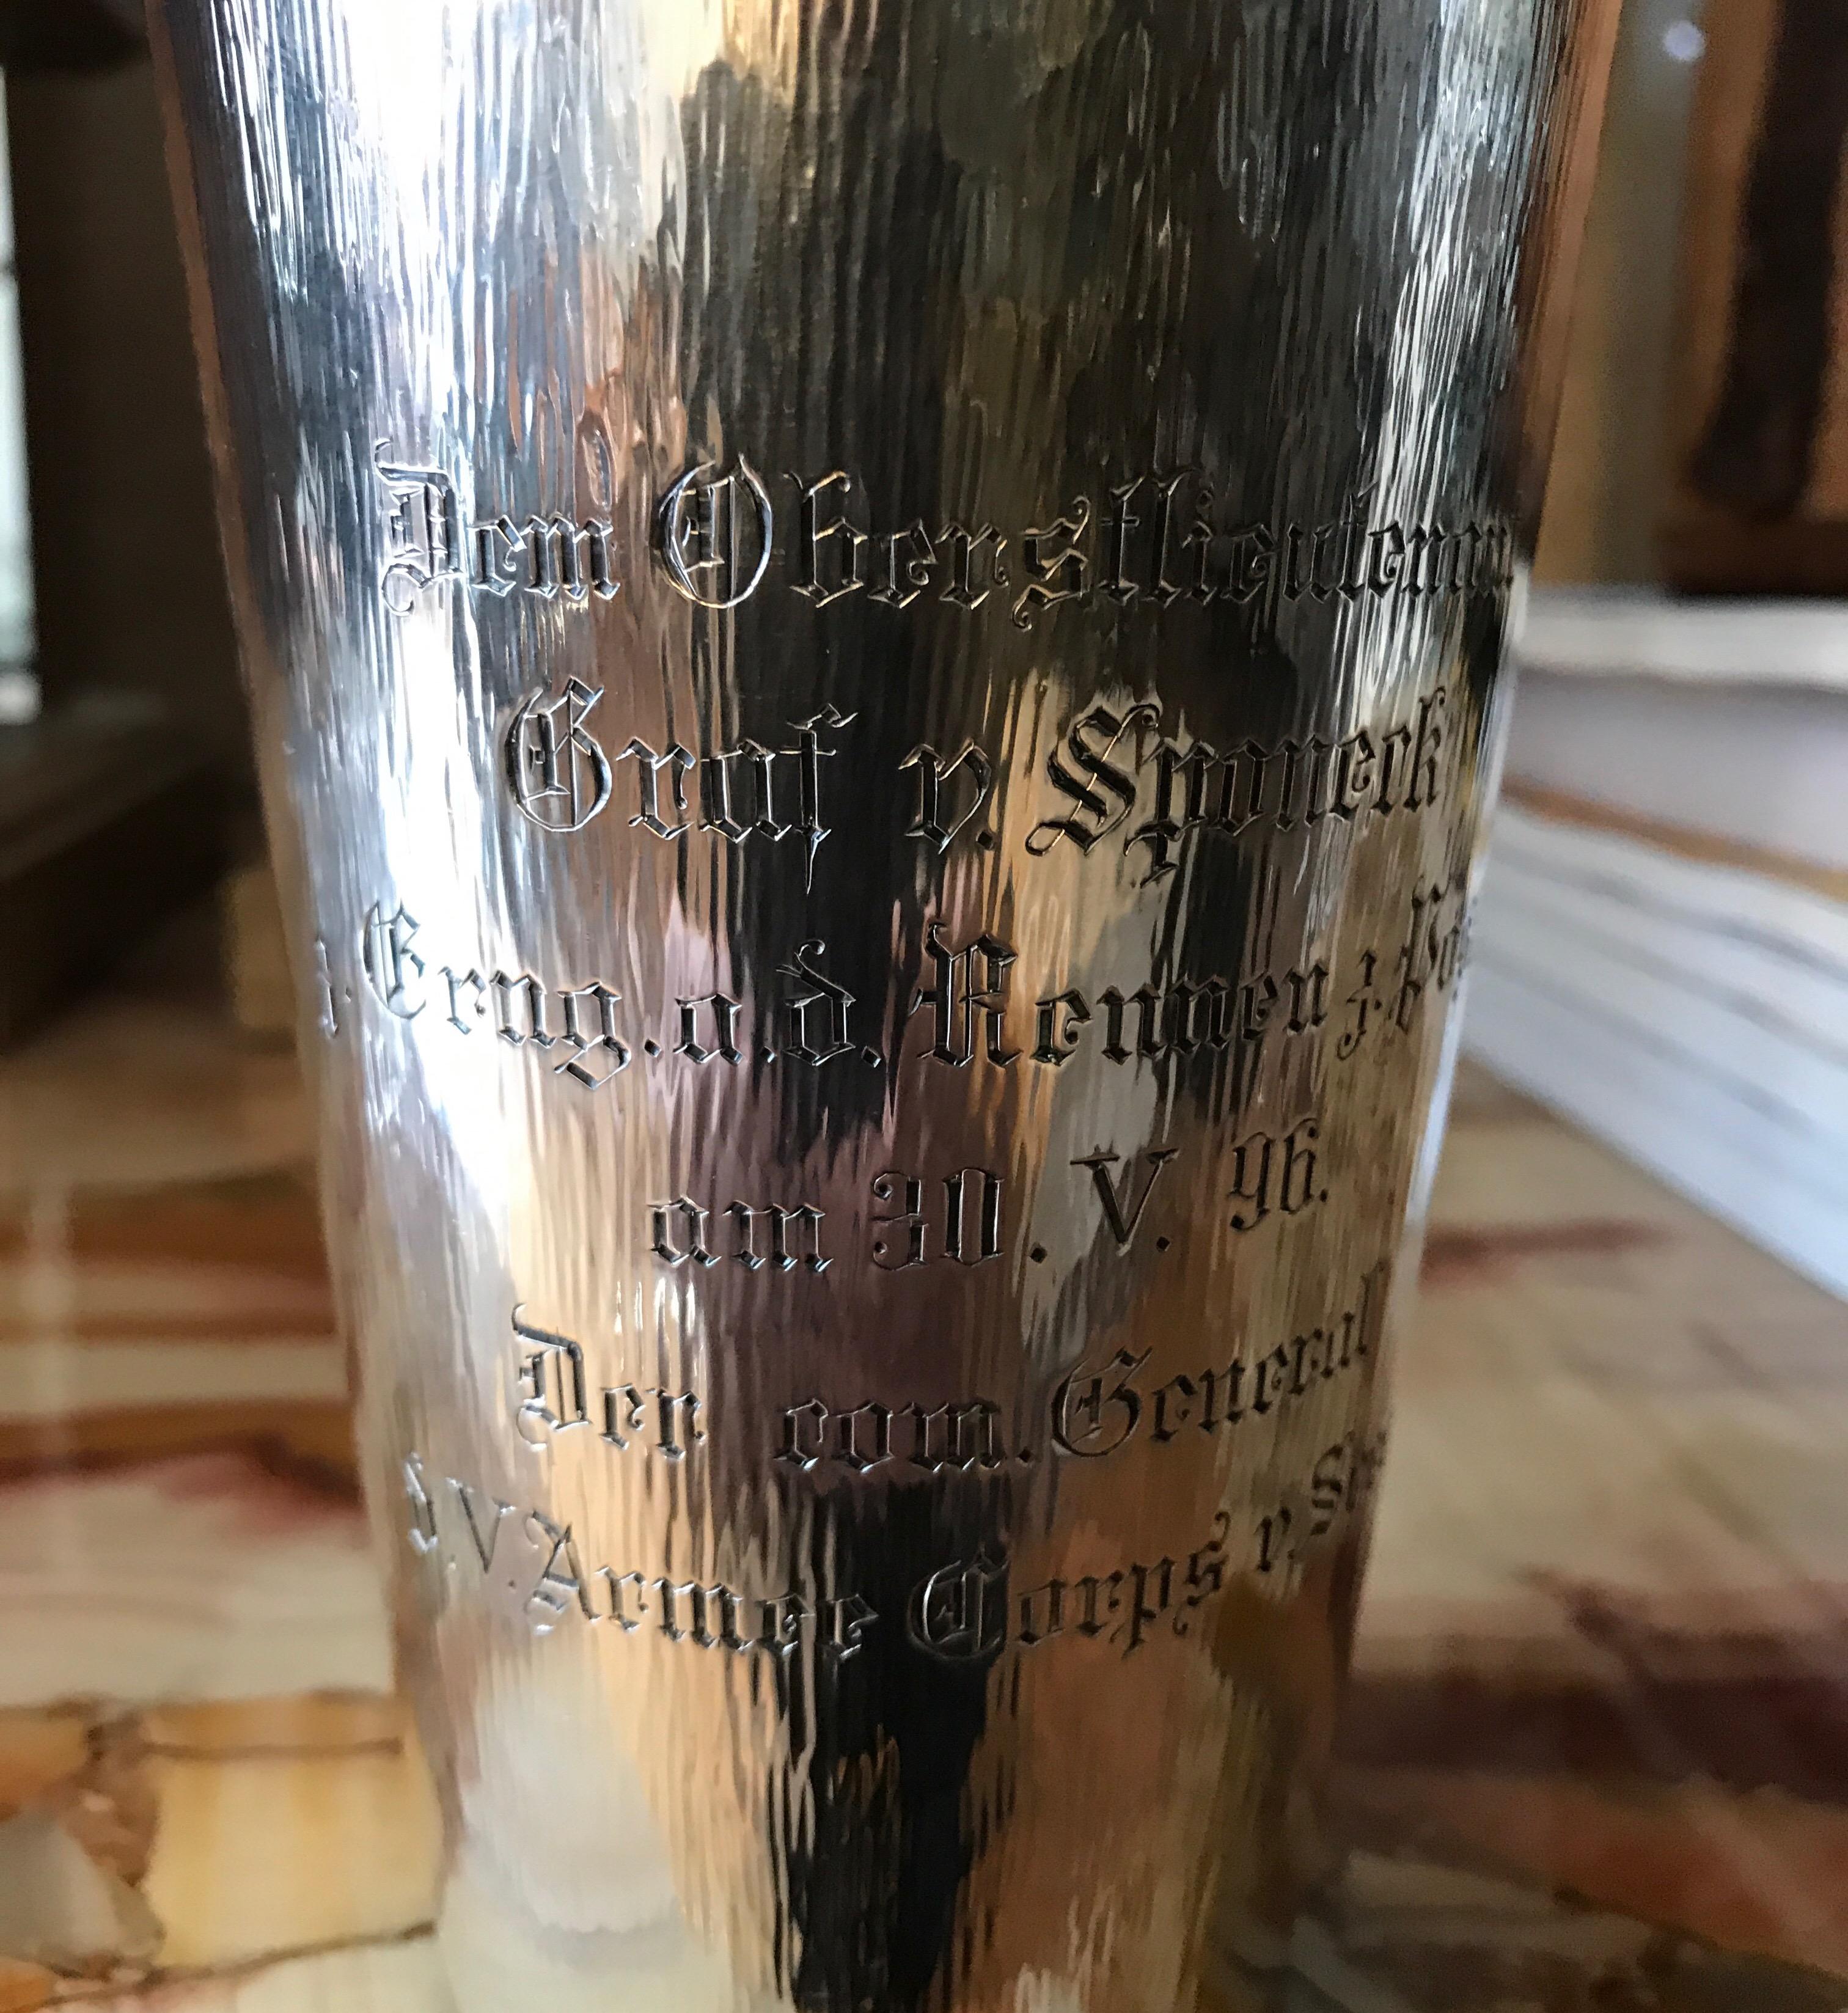 Hand hammered early 20th century German silver presentation beaker.
Engraving in German. Hallmarked to the base.
Fantastic decorative object.